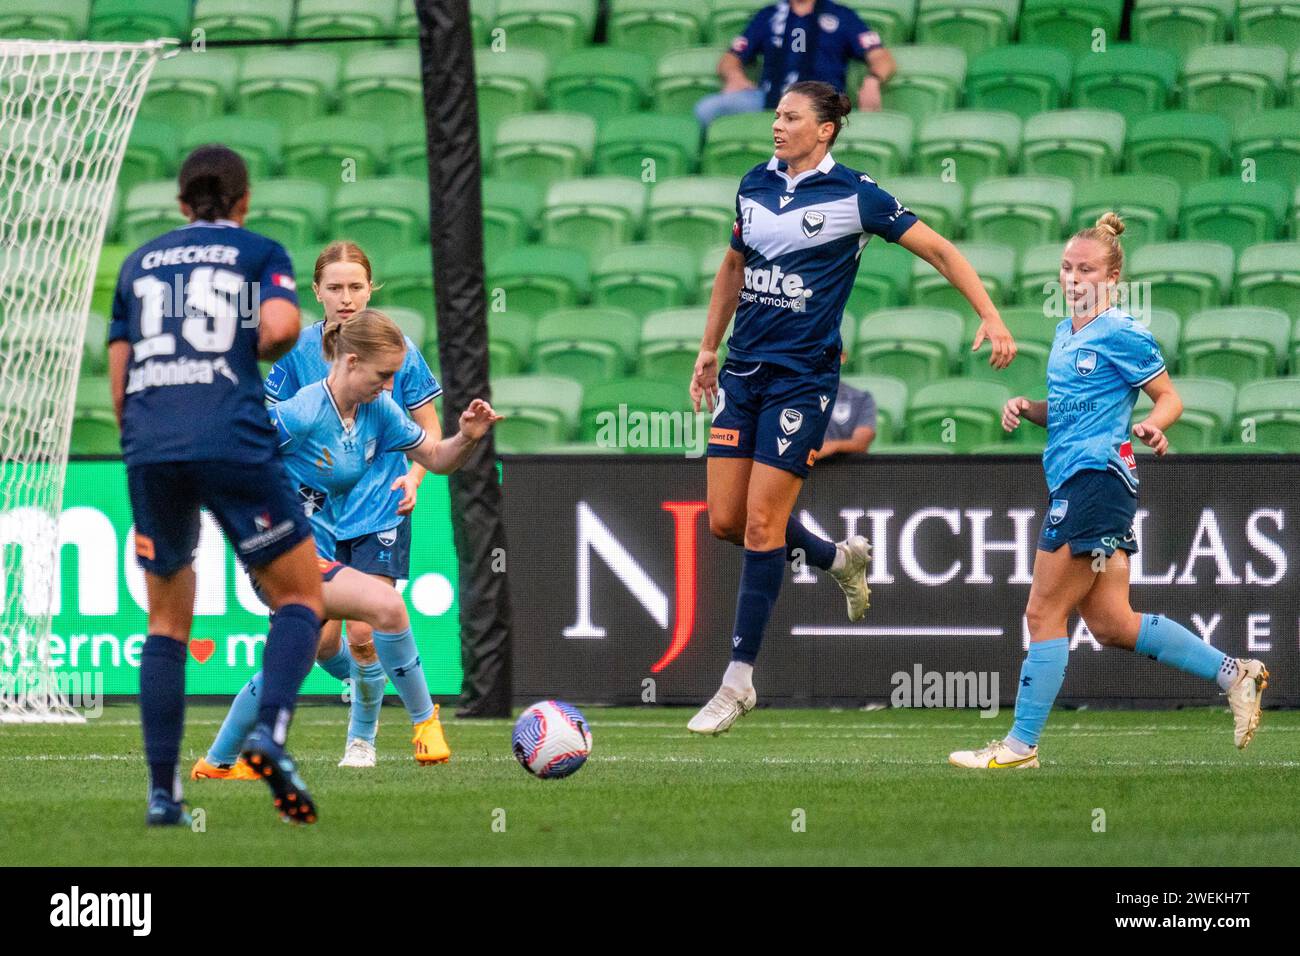 Melbourne, Australia. 26 January, 2024. Melbourne Victory FC Forward Emily Gielnik (#9) cops a boot to the foot and hops in pain during the Liberty A-League Women’s match between Melbourne Victory FC and Sydney FC at AAMI Park in Melbourne, Australia. Credit: James Forrester/Alamy Live News Stock Photo